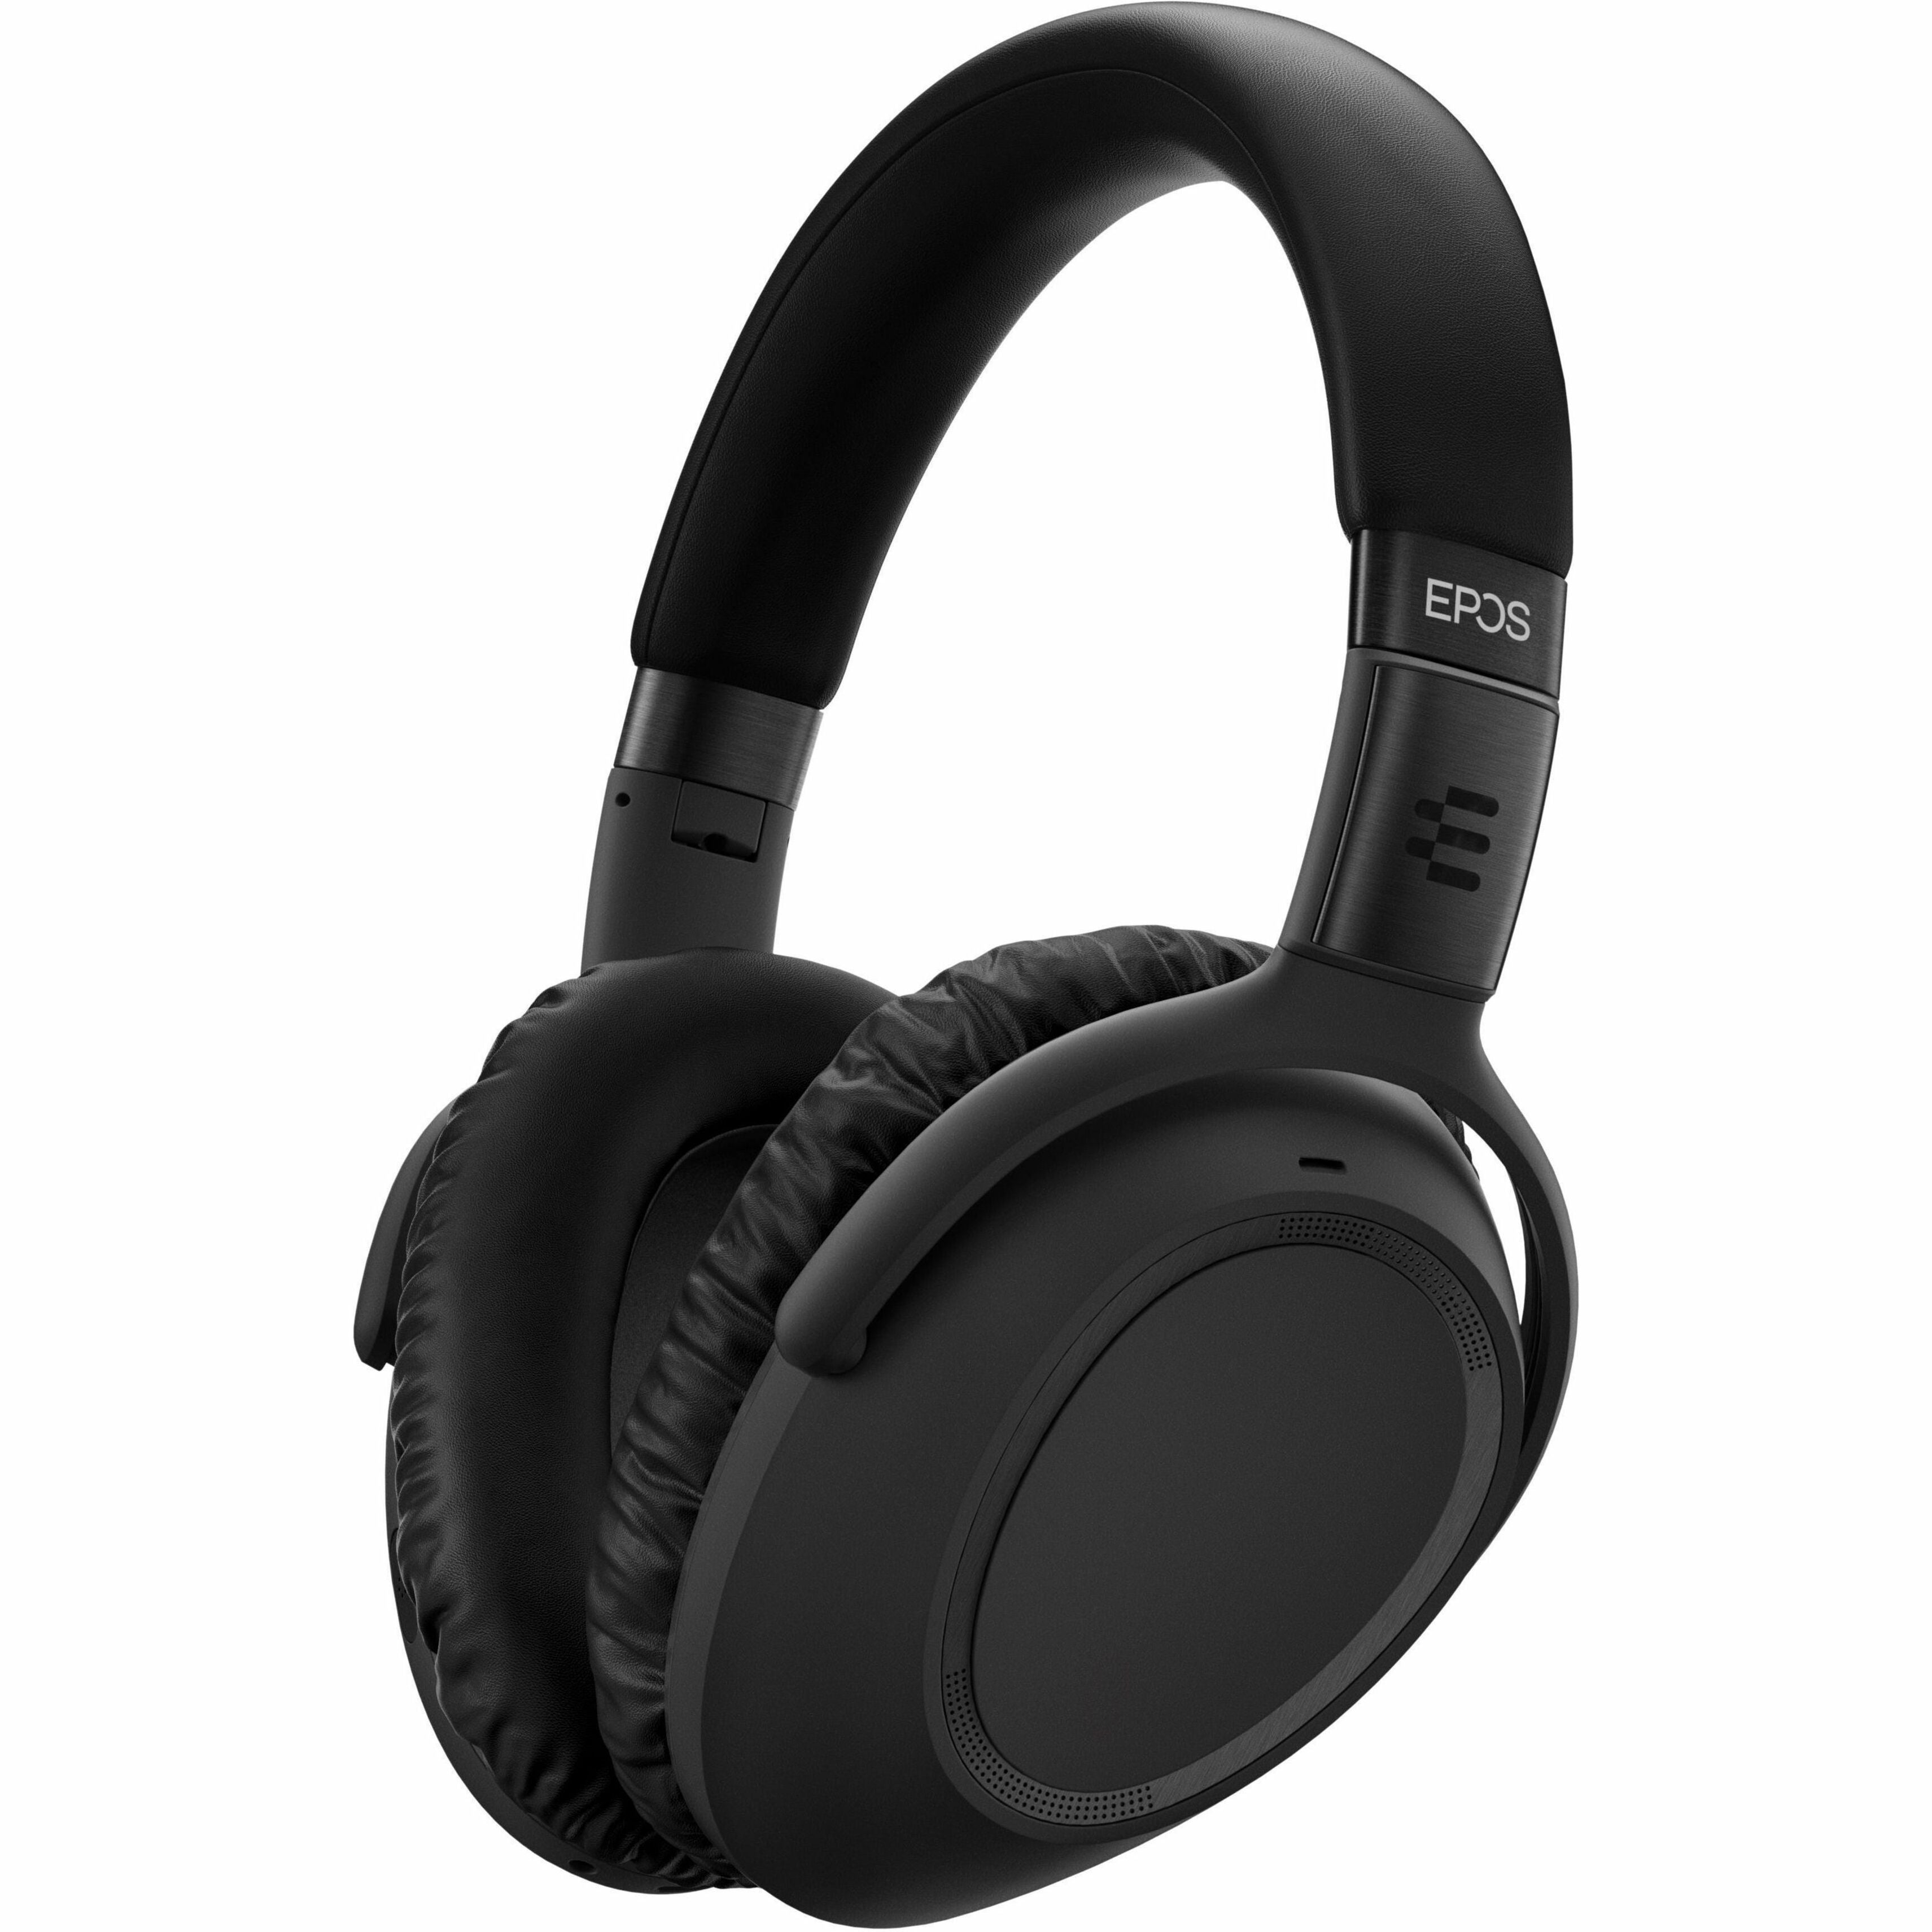 EPOS | SENNHEISER 1000200 ADAPT 660 Headset, Wireless Bluetooth Stereo Headphones with Active Noise Cancelling